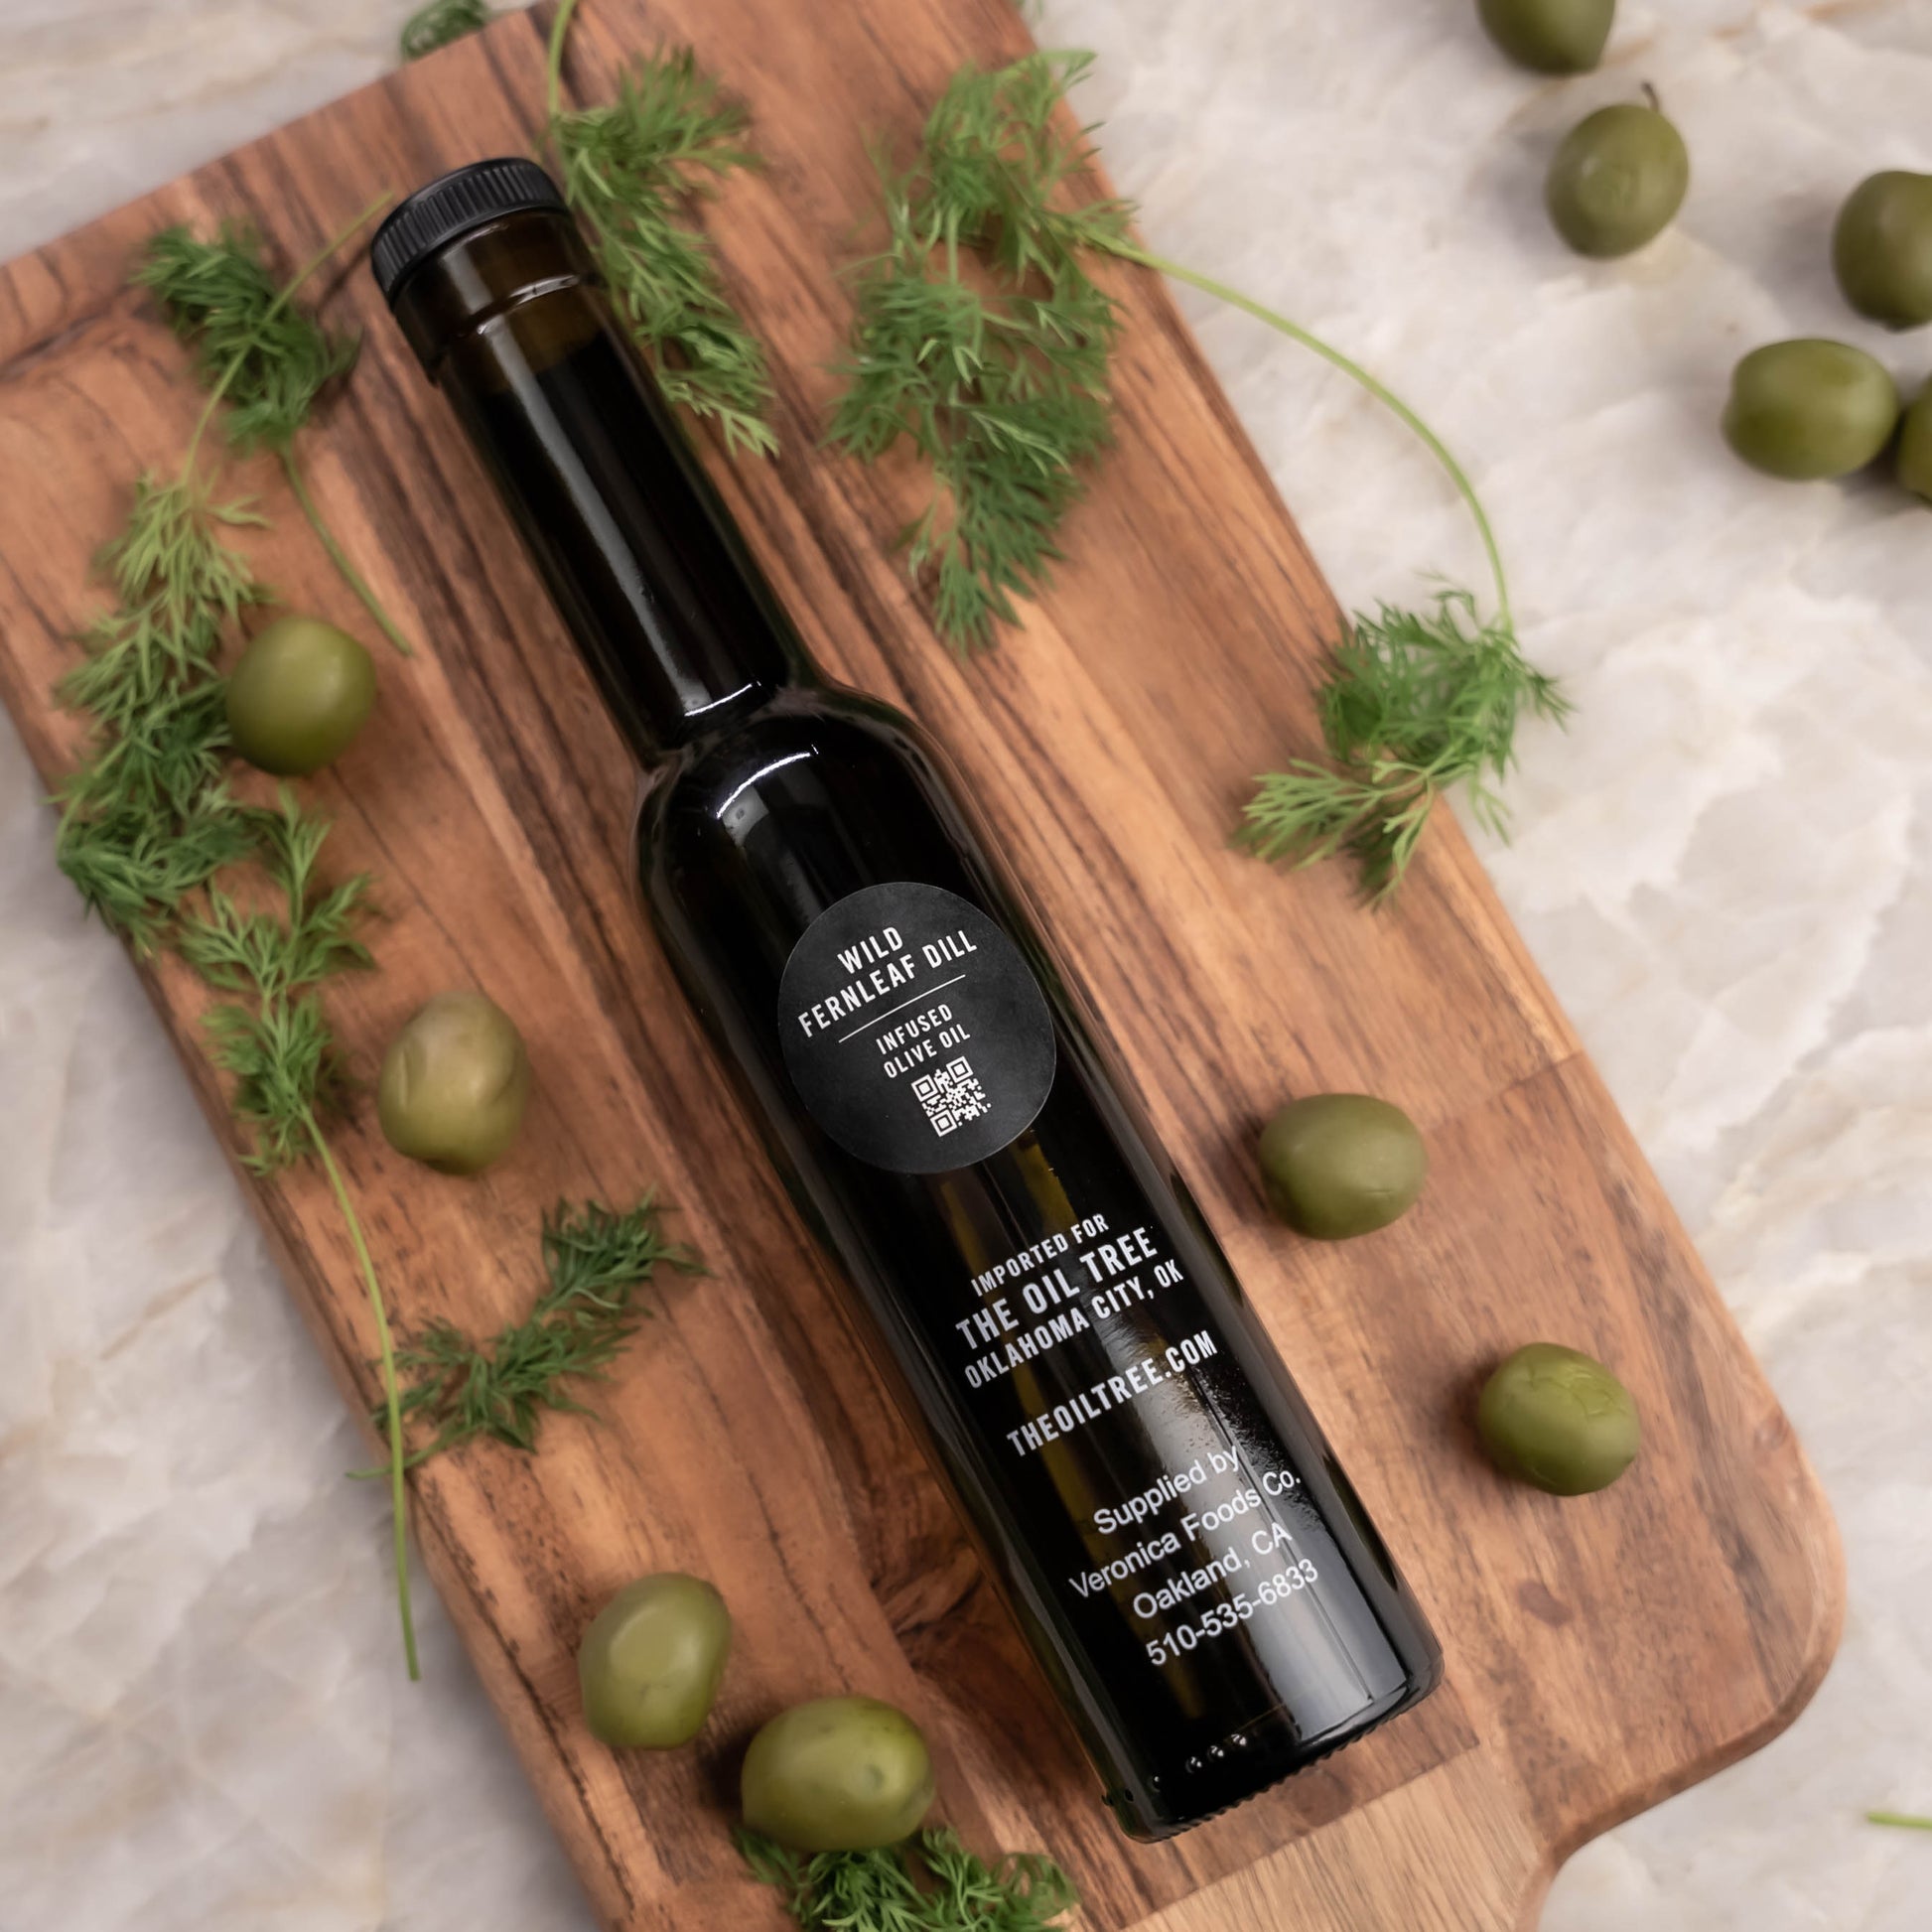 wild fernleaf dill infused olive oil